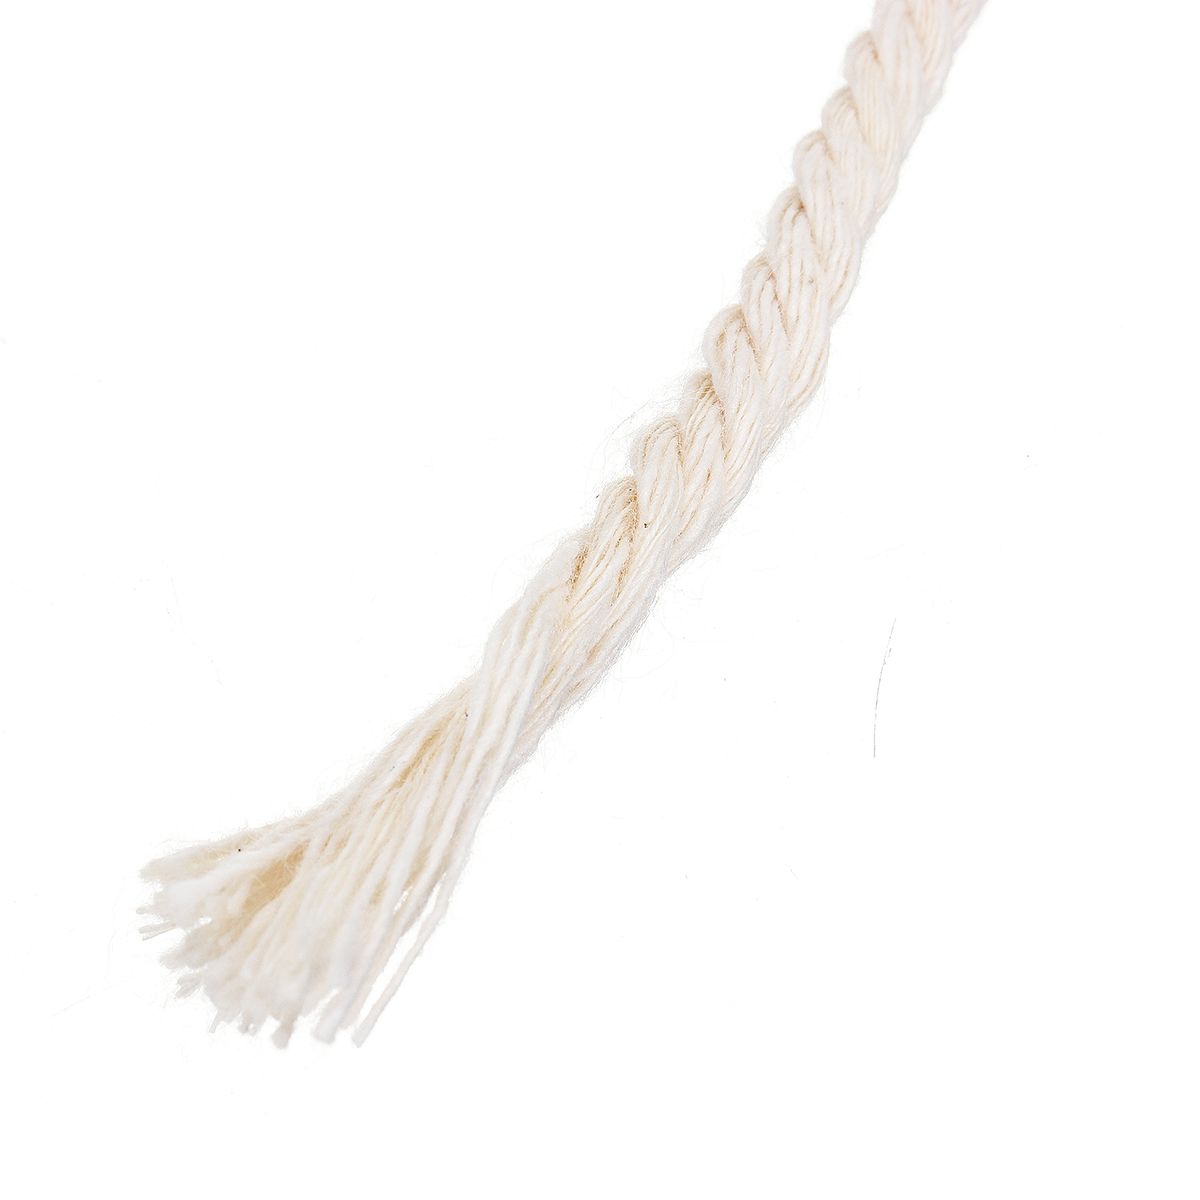 4mmx100m-Natural-Beige-Cotton-Twisted-Cord-Rope-DIY-Craft-Macrame-Woven-String-Braided-Wire-1394850